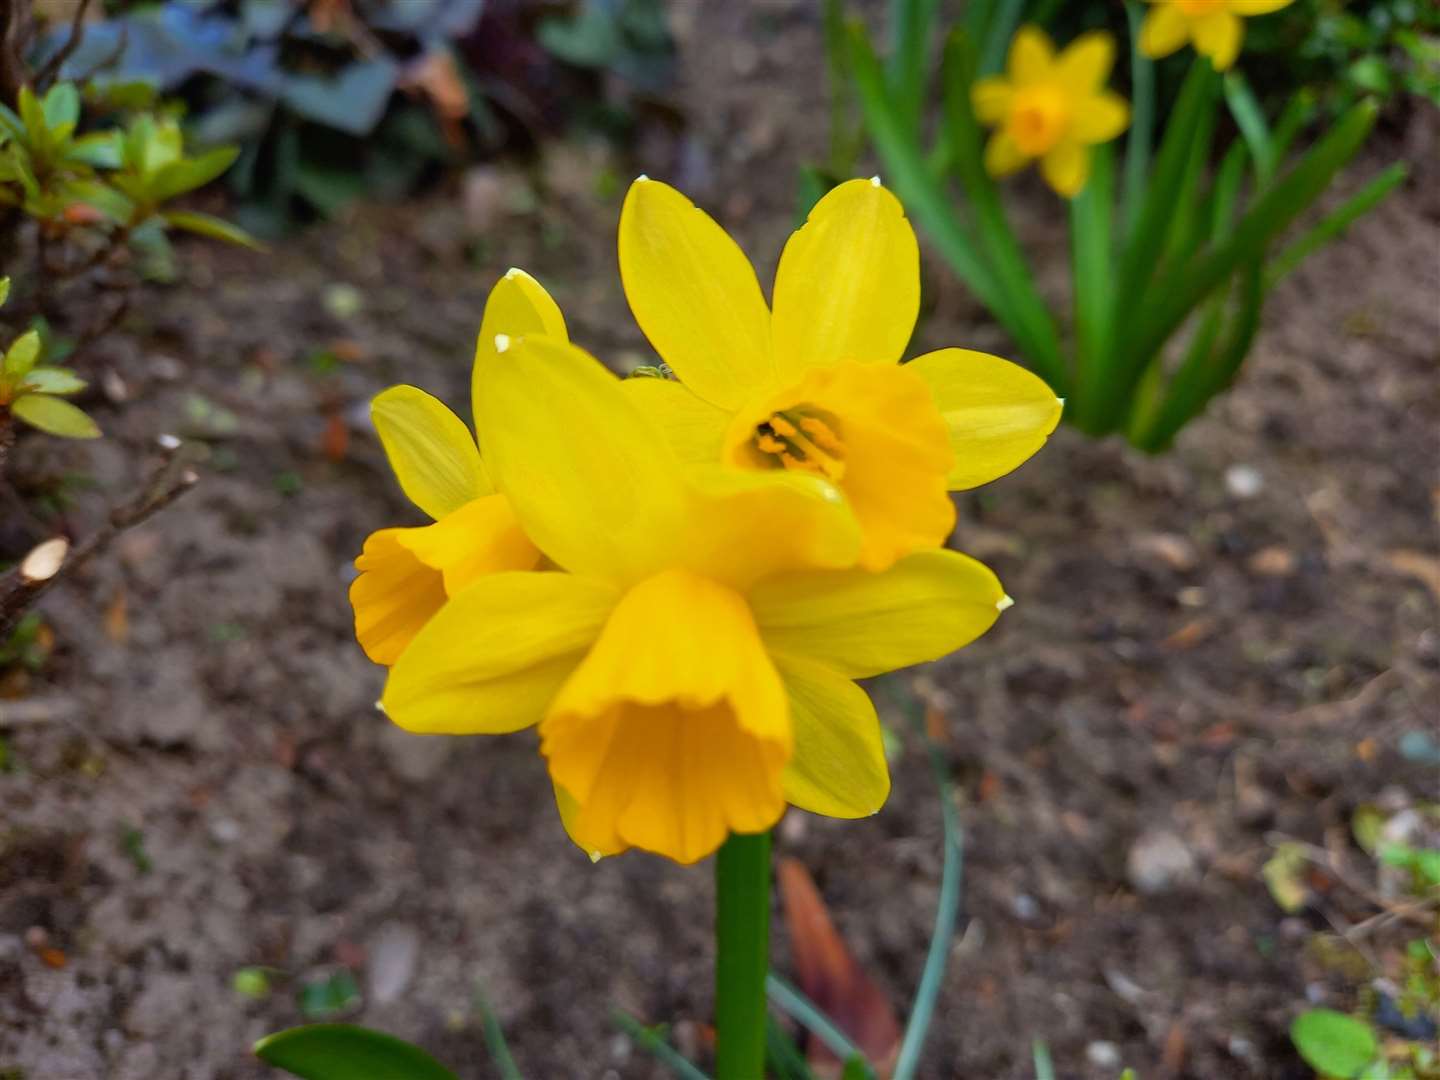 A three-headed daffodil, sent in by Lisa Esslemont from Forres.